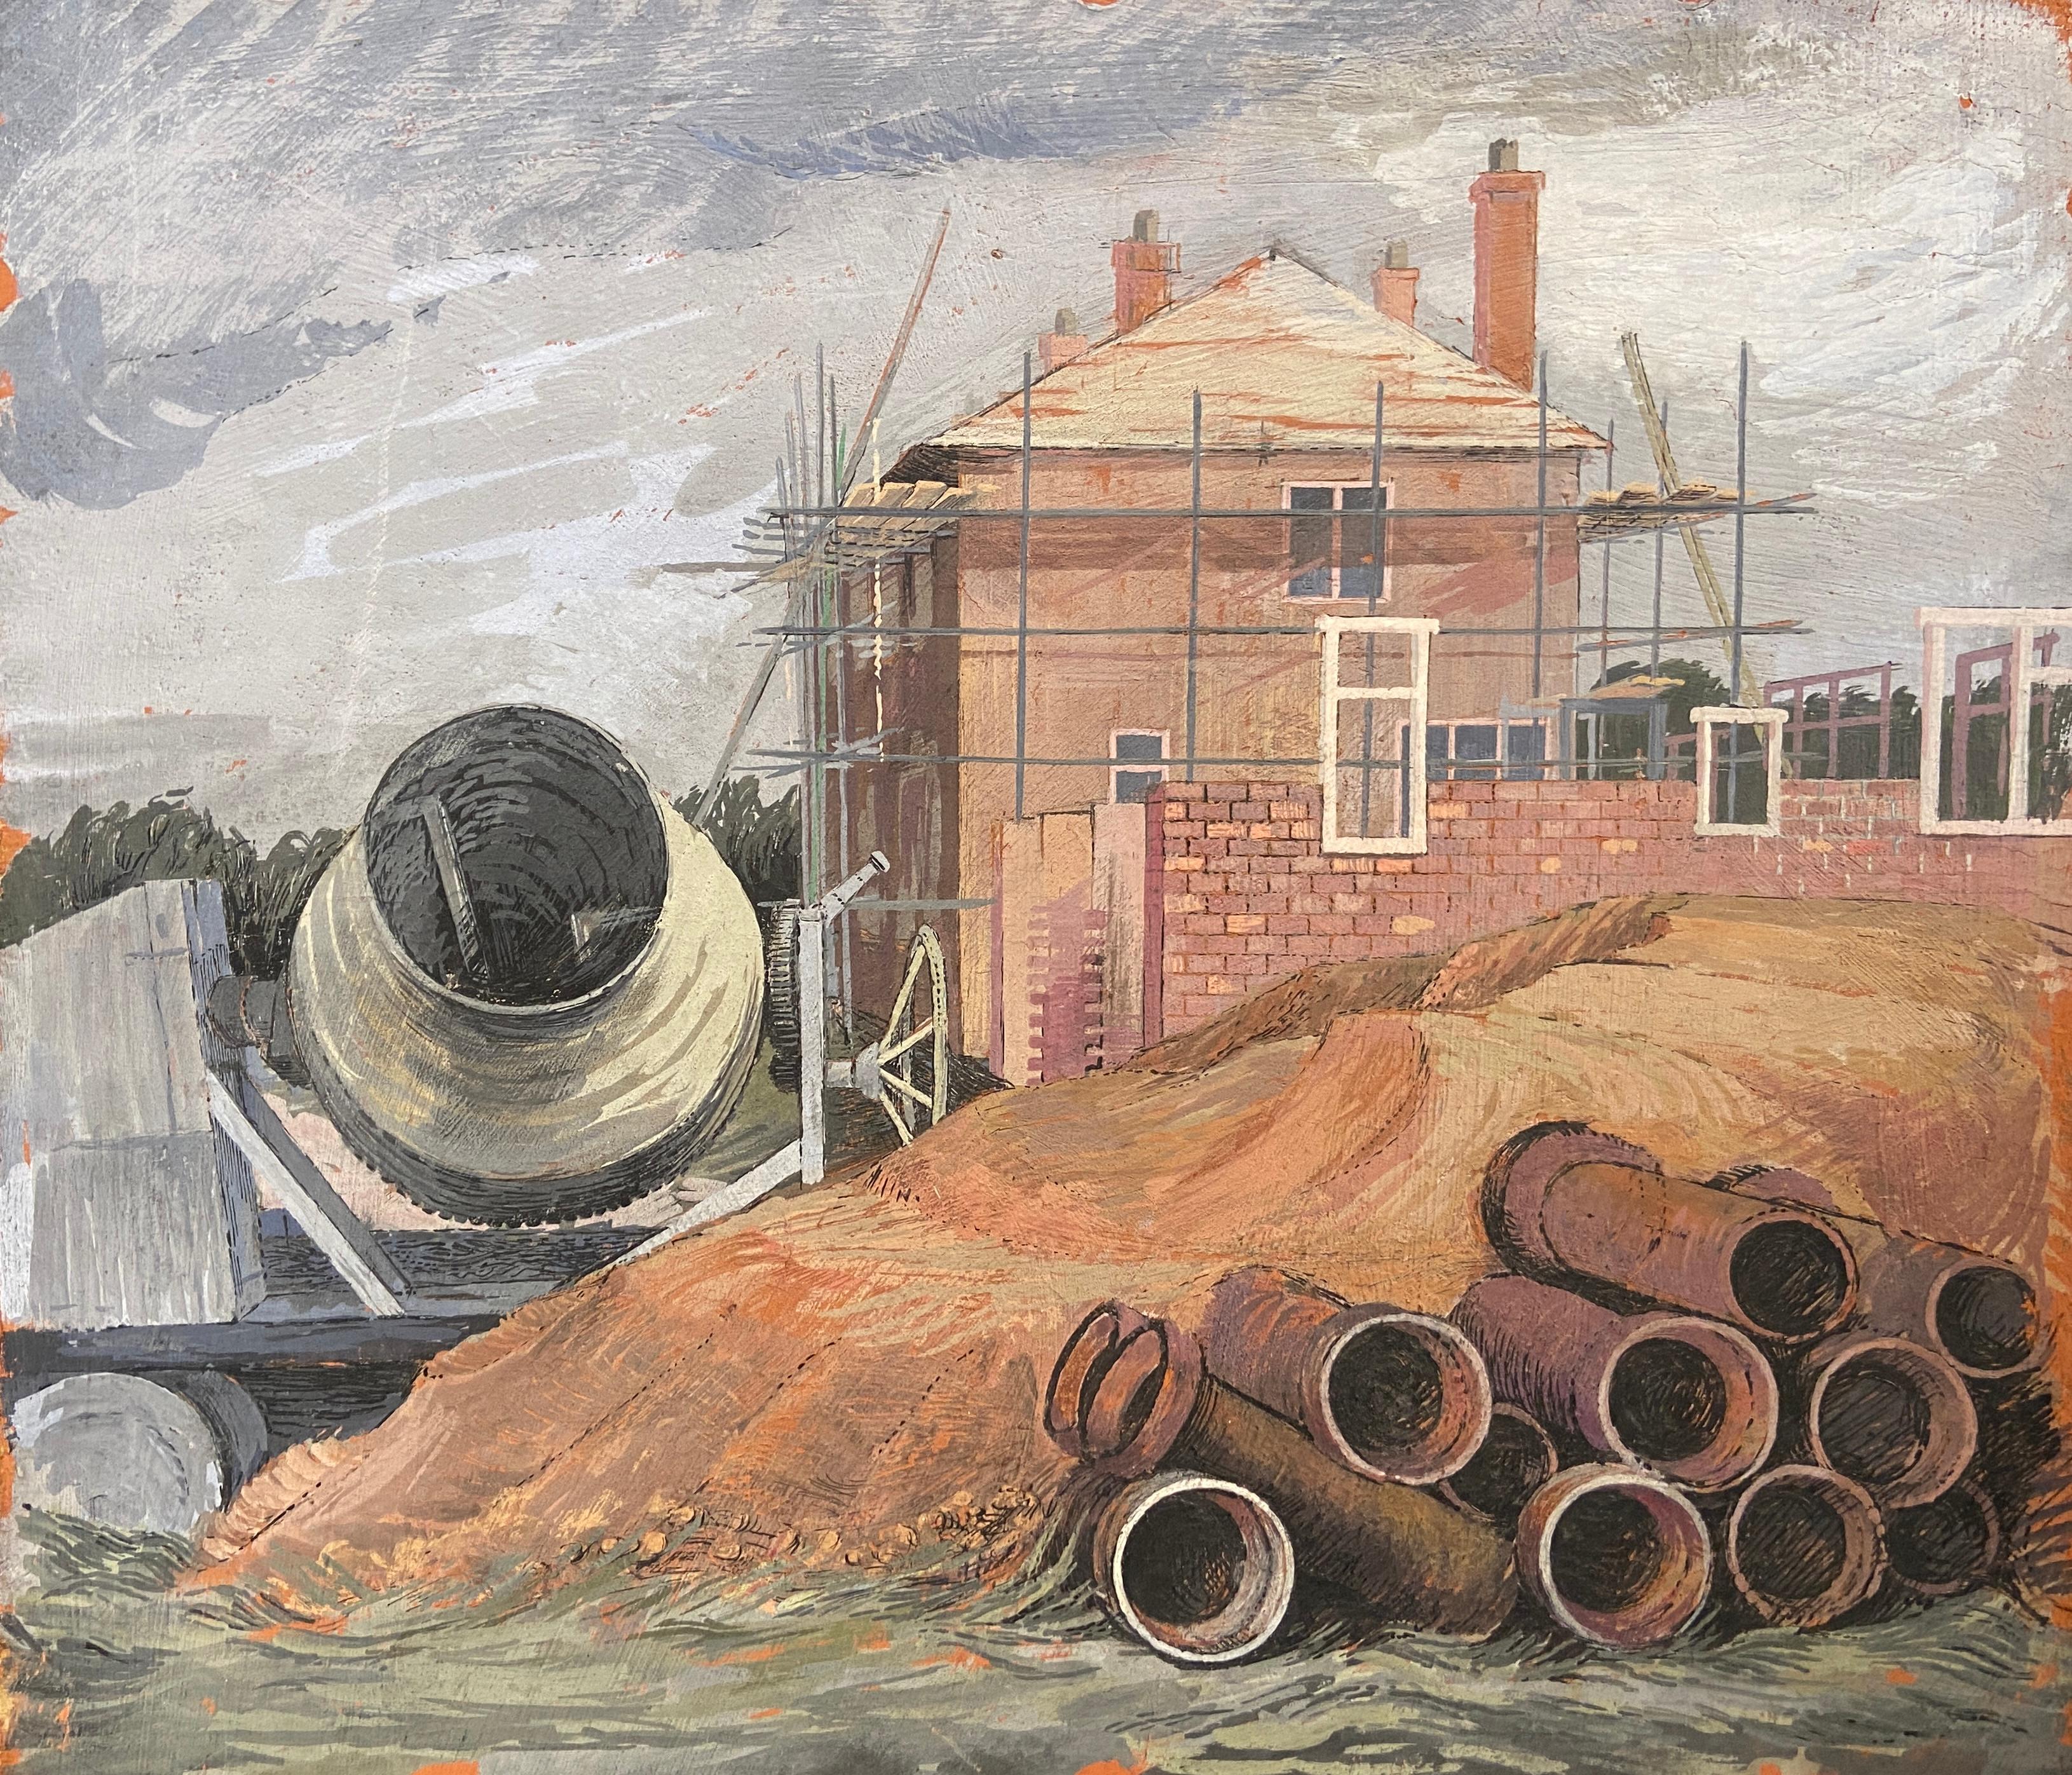 20th Century British School Landscape Painting - Founded on Sand, Gouache and Ink Artwork, British School Mid-20th Century